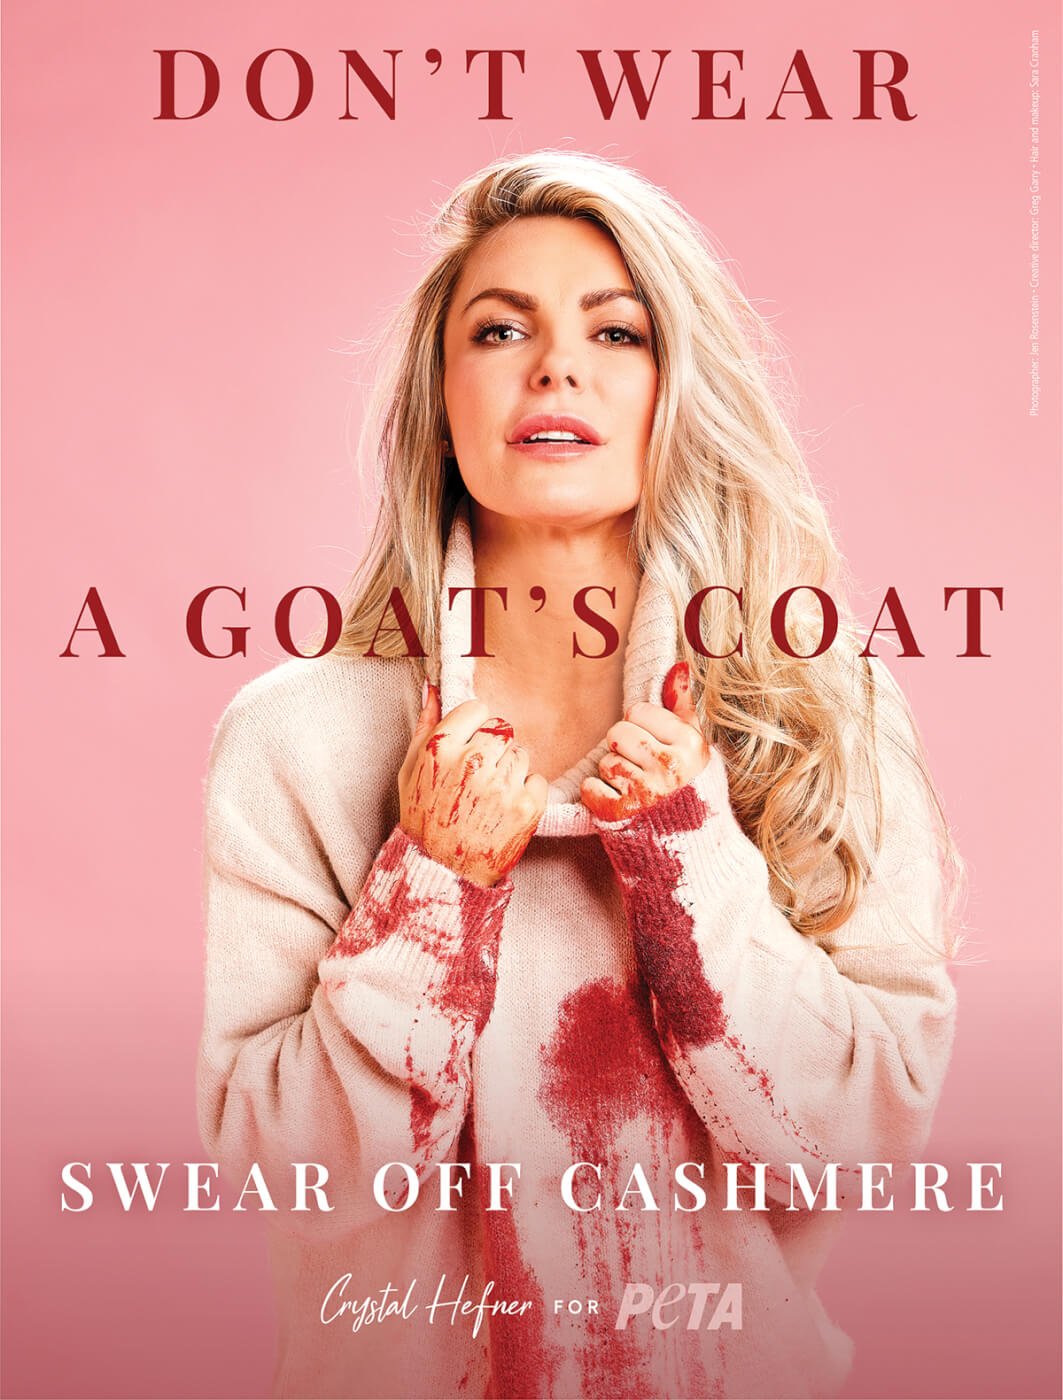 crystal hefner dont wear a goats coat fp 72 ‘Blood on Your Hands’: Crystal Hefner Calls Out Cruelty Behind Cashmere in New PETA Campaign